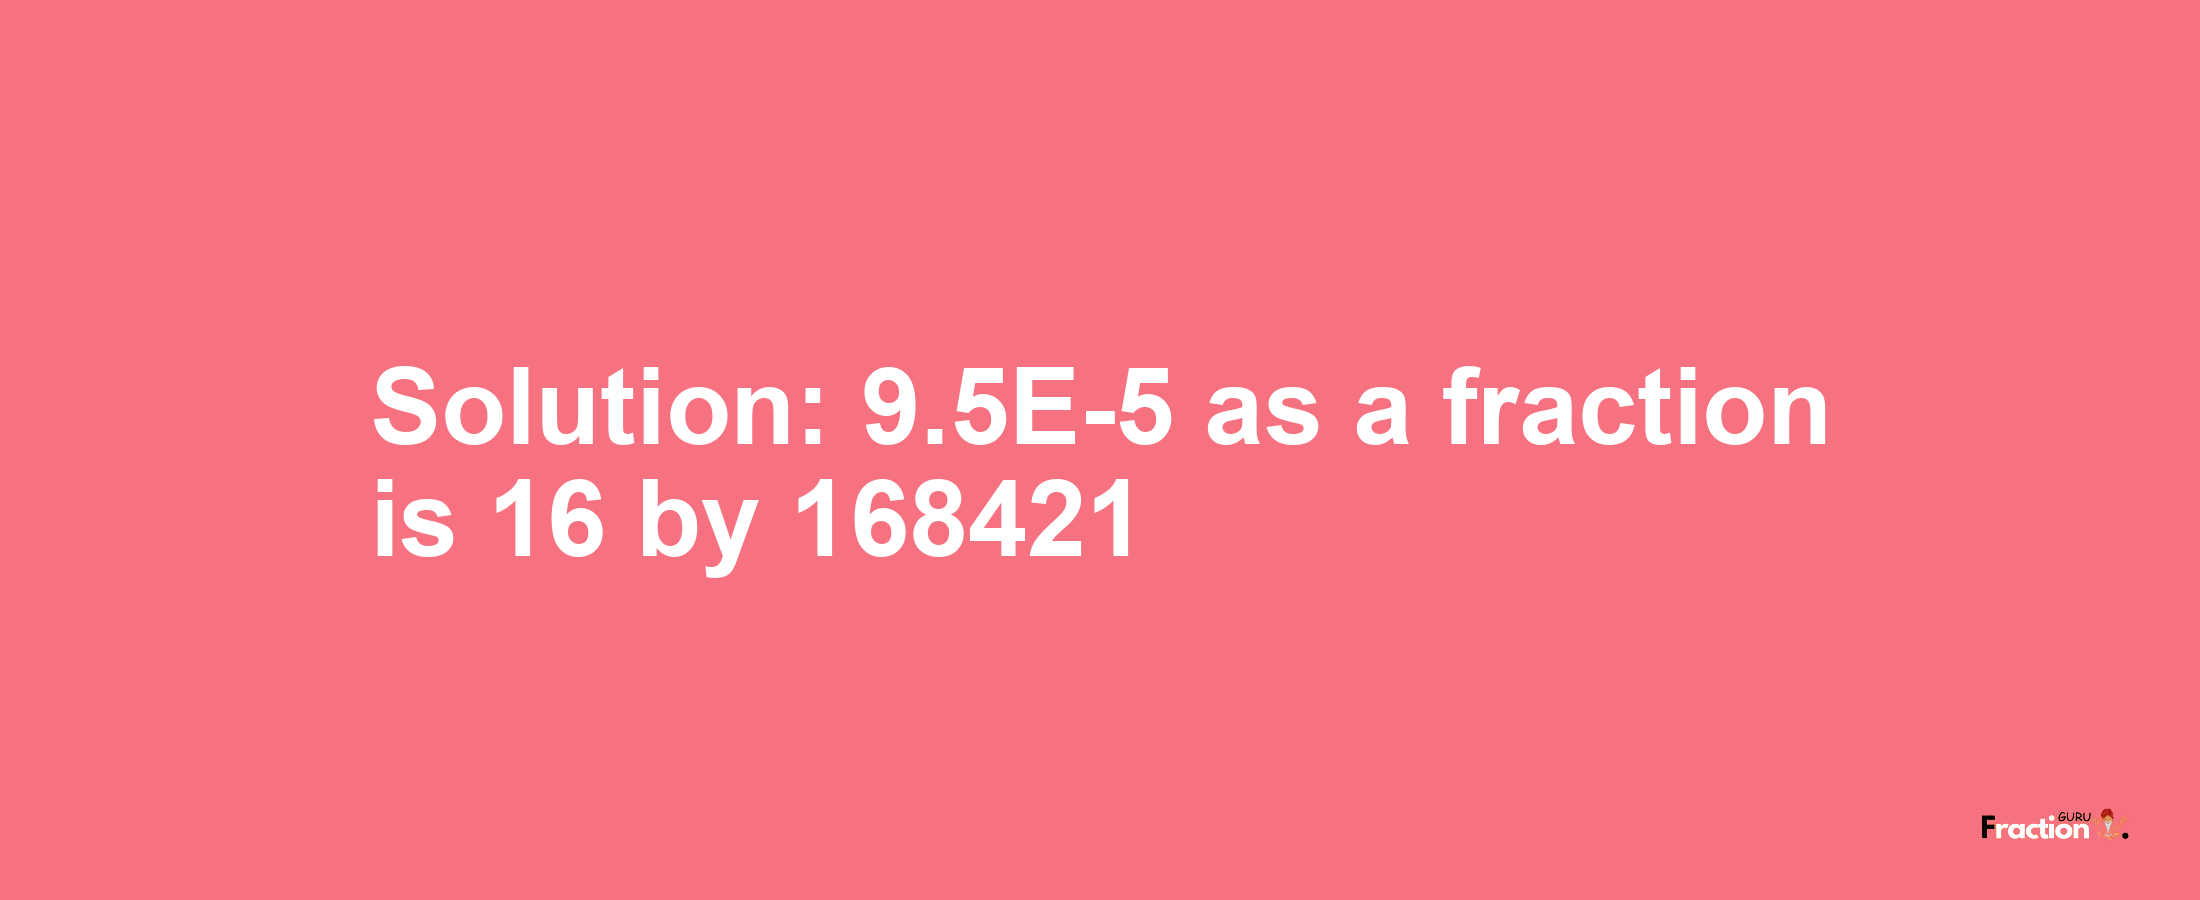 Solution:9.5E-5 as a fraction is 16/168421